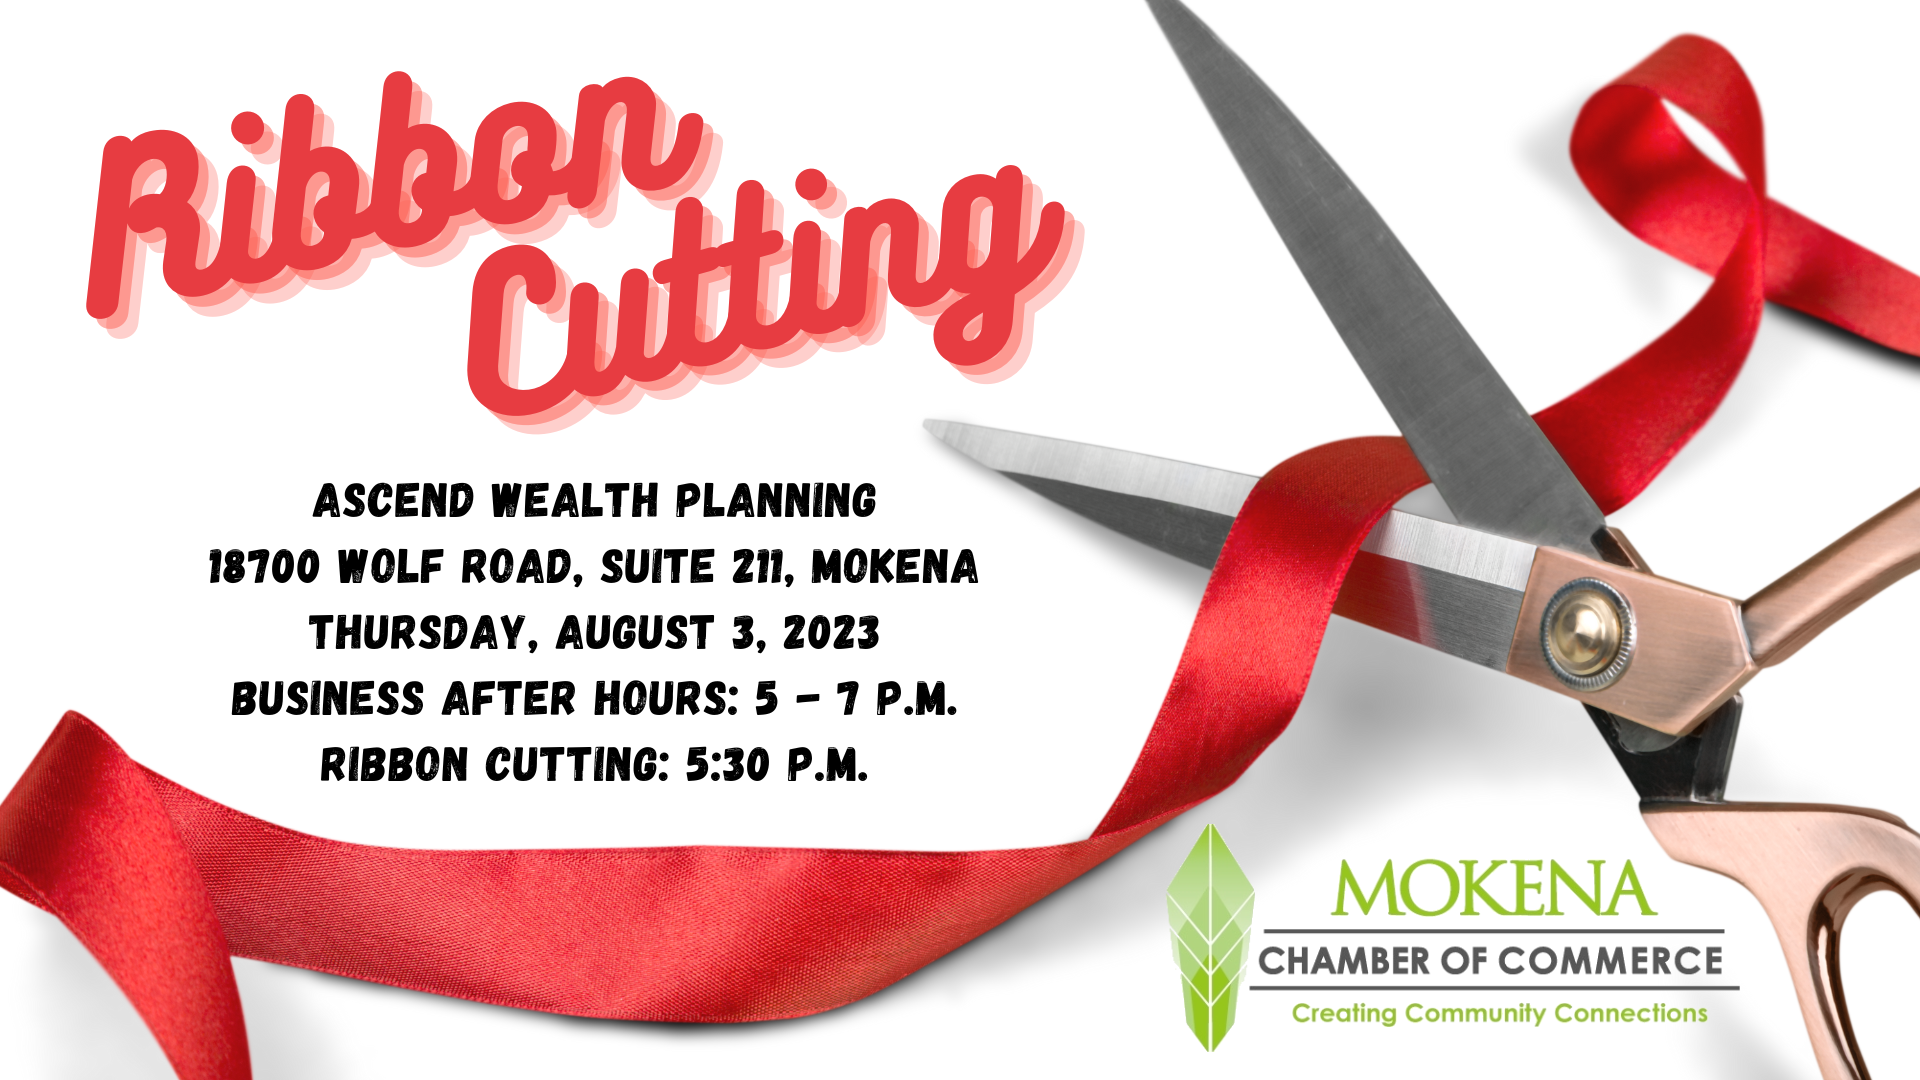 Ribbon Cutting Facebook Event Ascend Wealth Planning 8.3.23